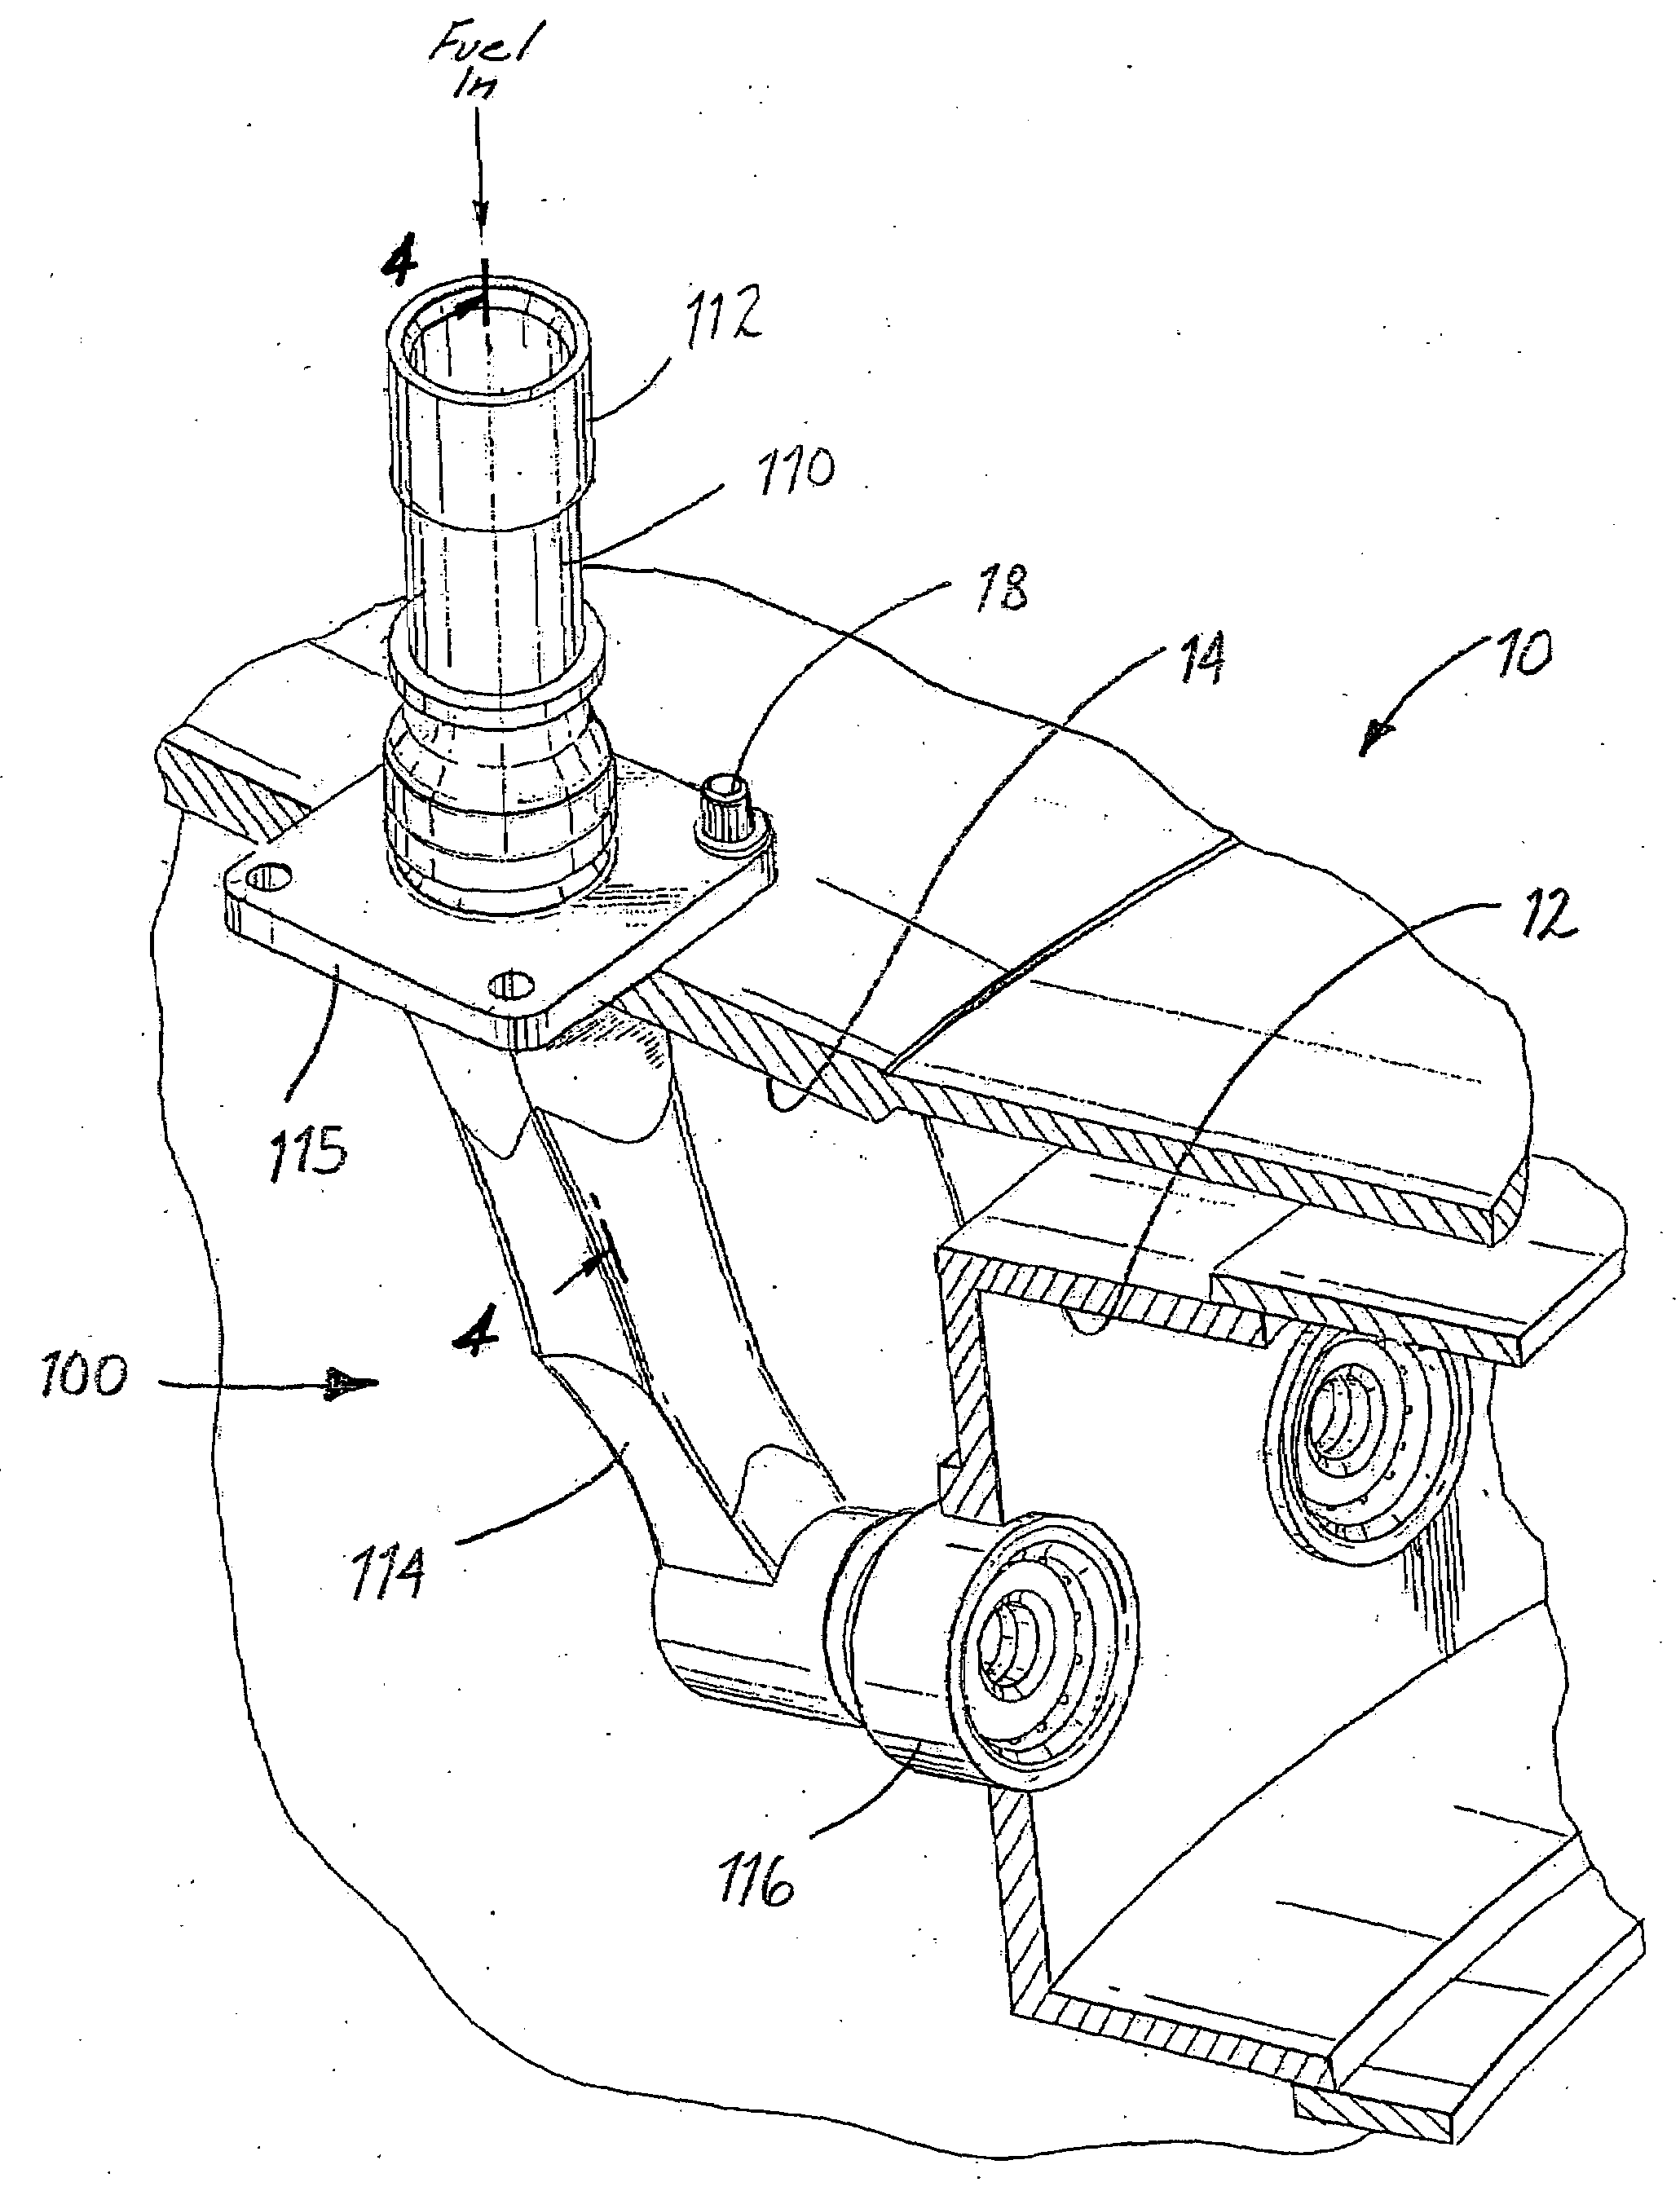 Dynamic sealing assembly to accommodate differential thermal growth of fuel injector components